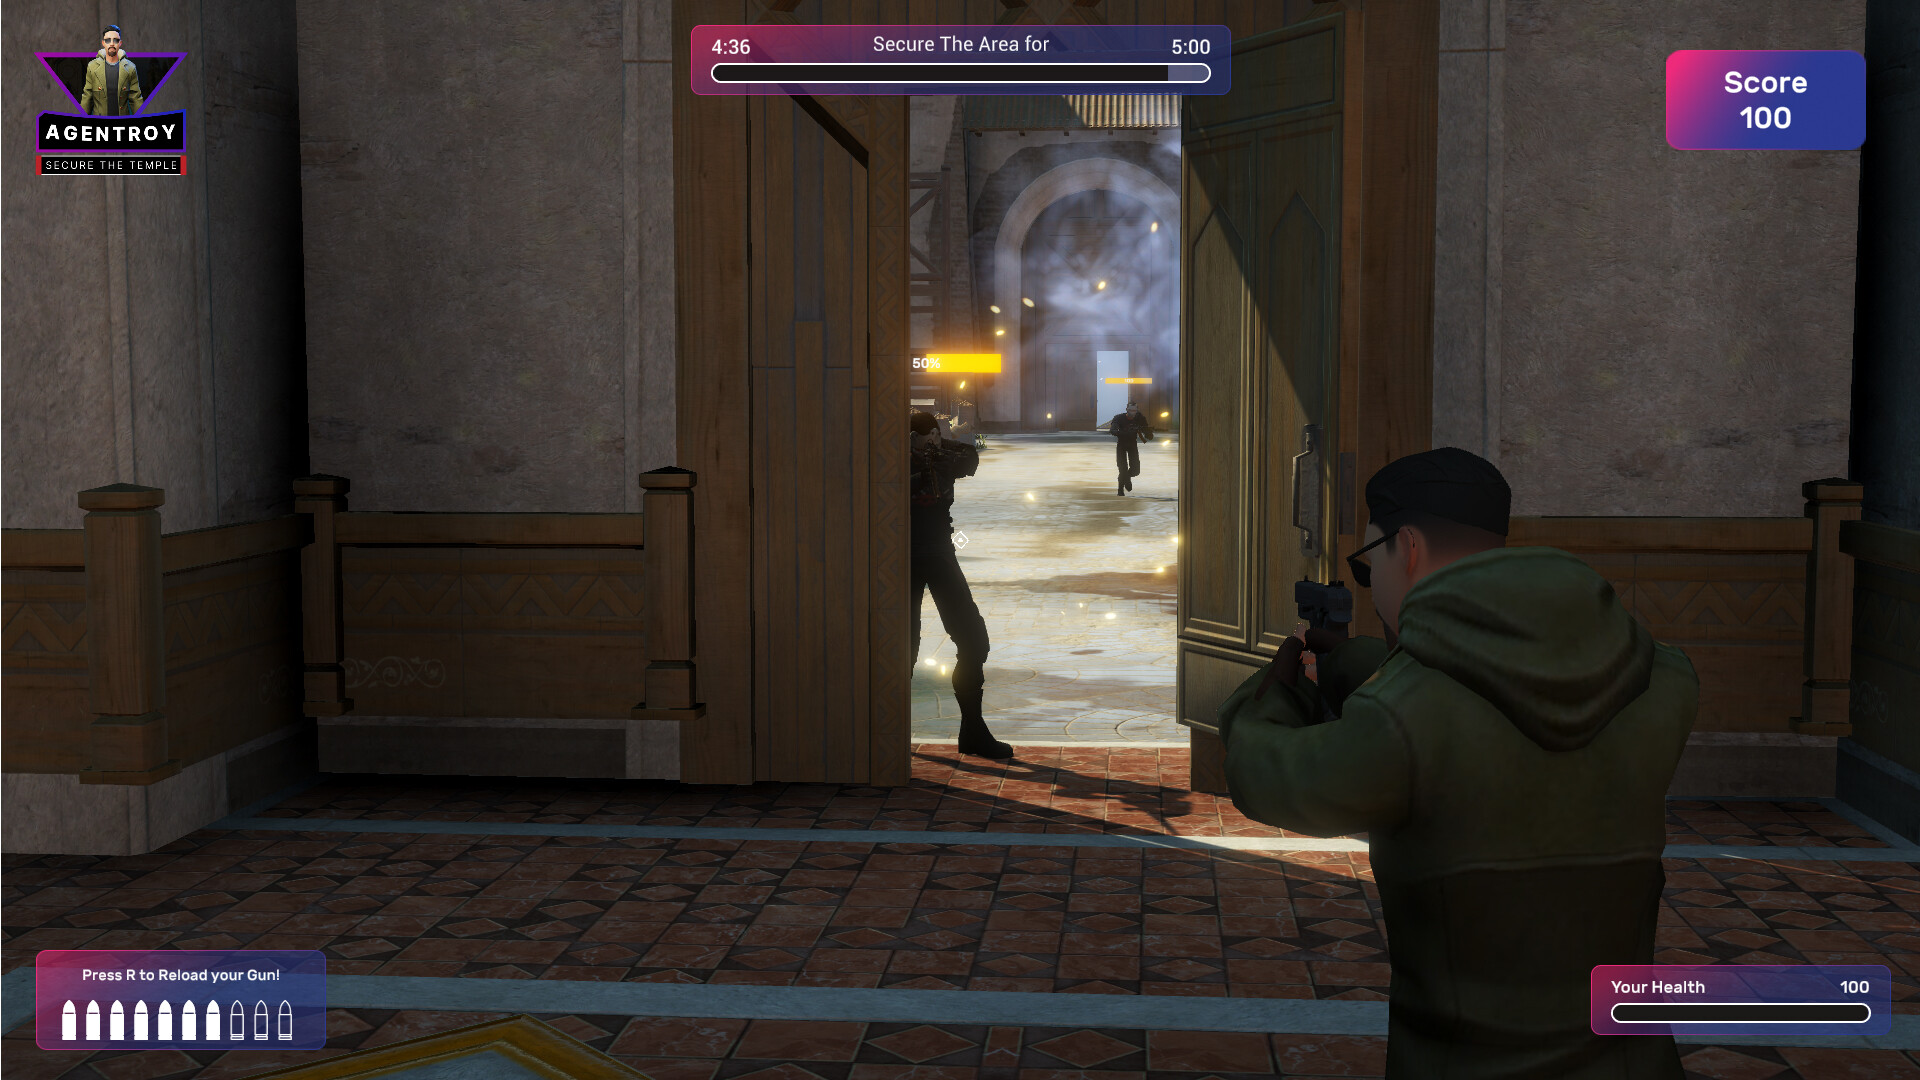 AgentRoy - Secure The Temple Free Download for PC